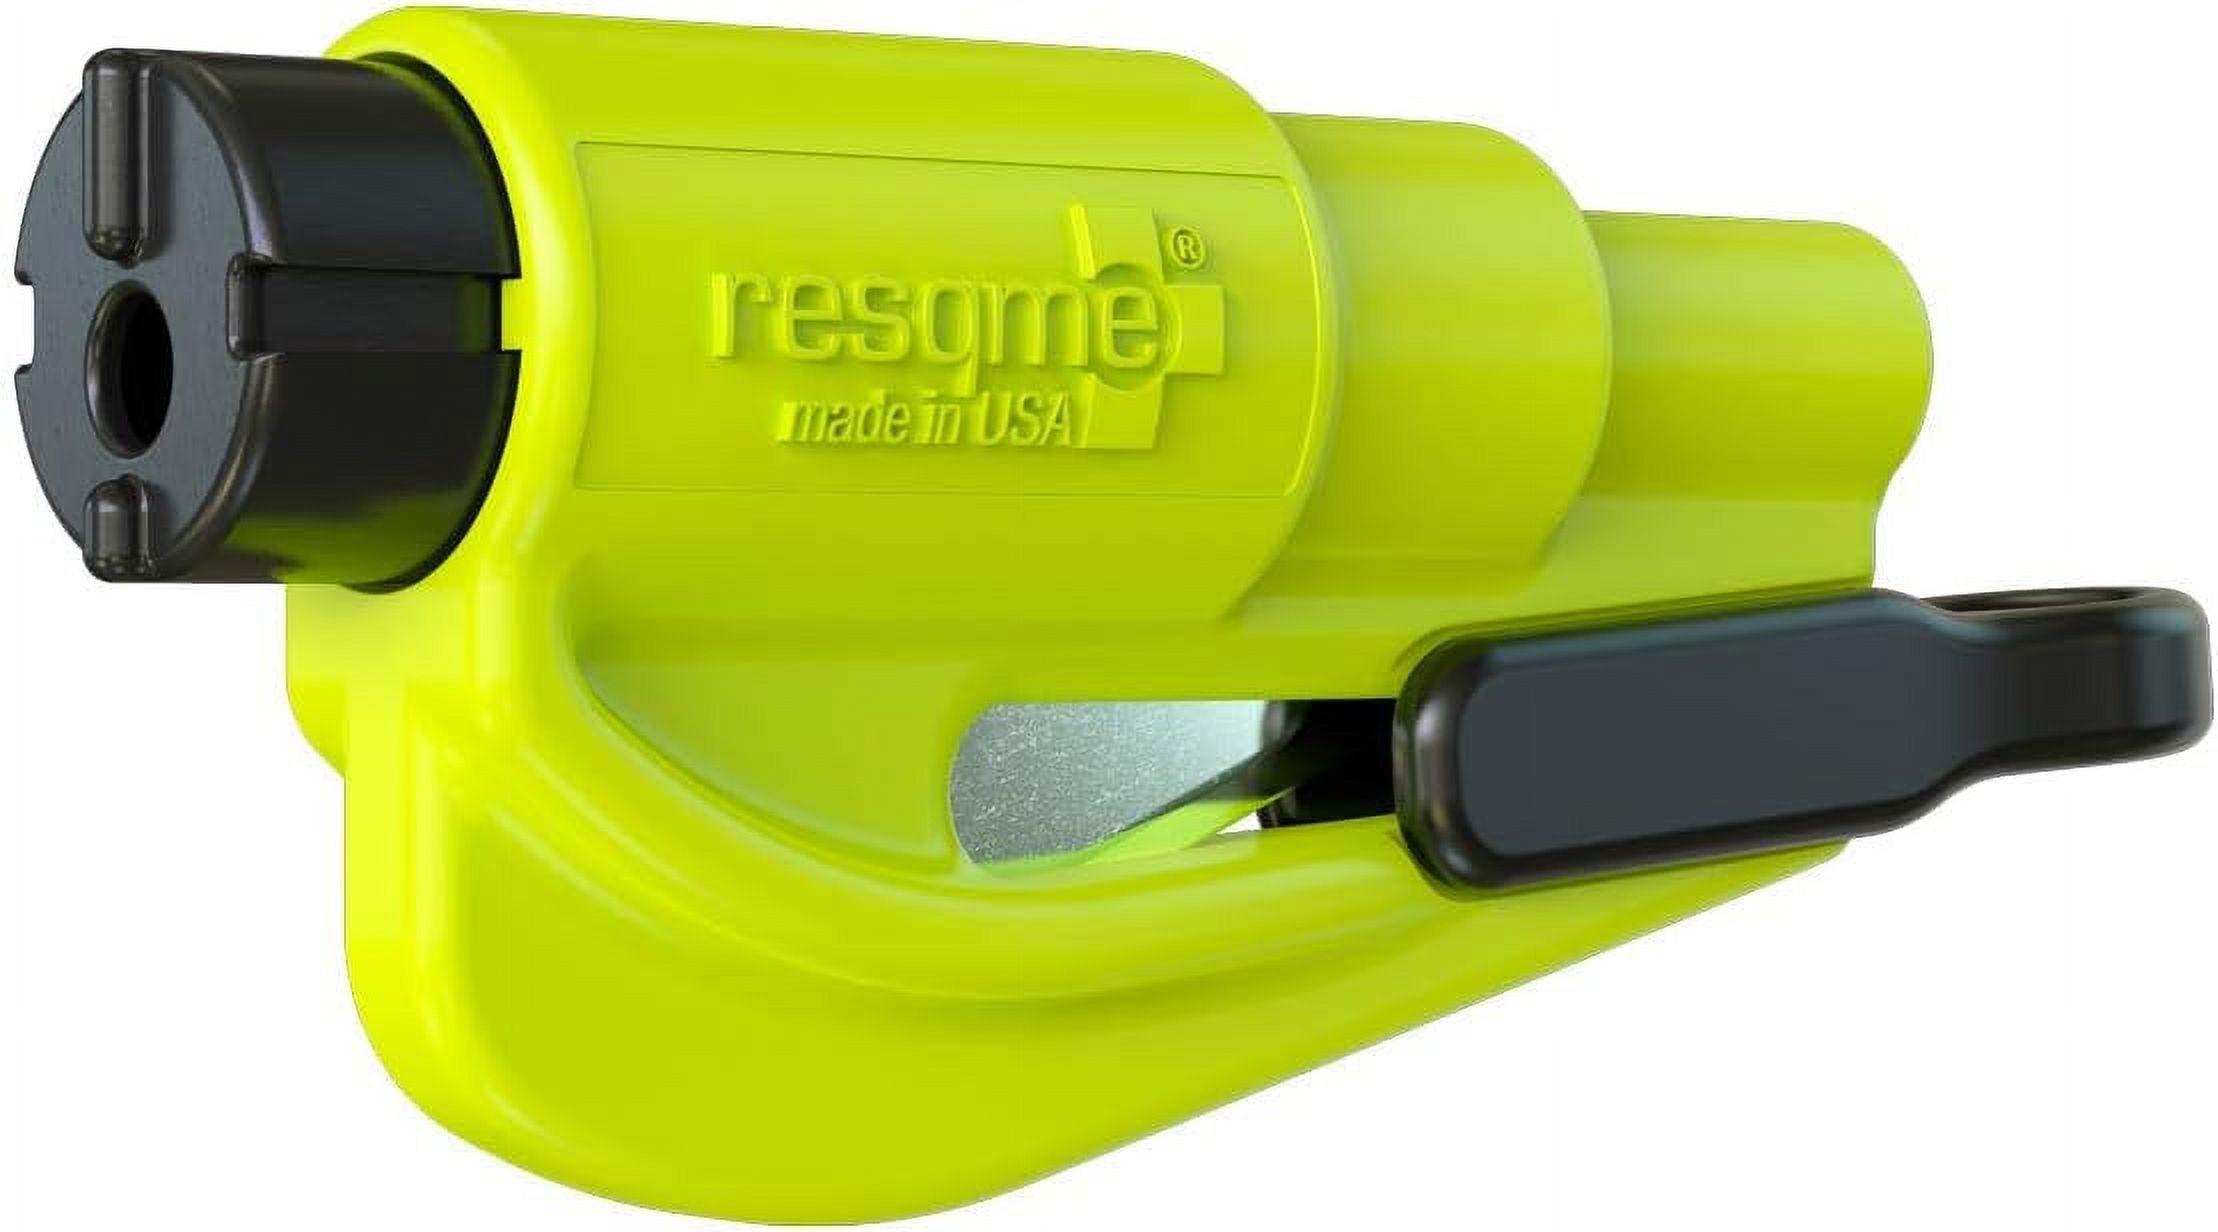 Resqme The Original Car Escape Tool, Seatbelt Cutter and Window Breaker, Yellow - image 1 of 4